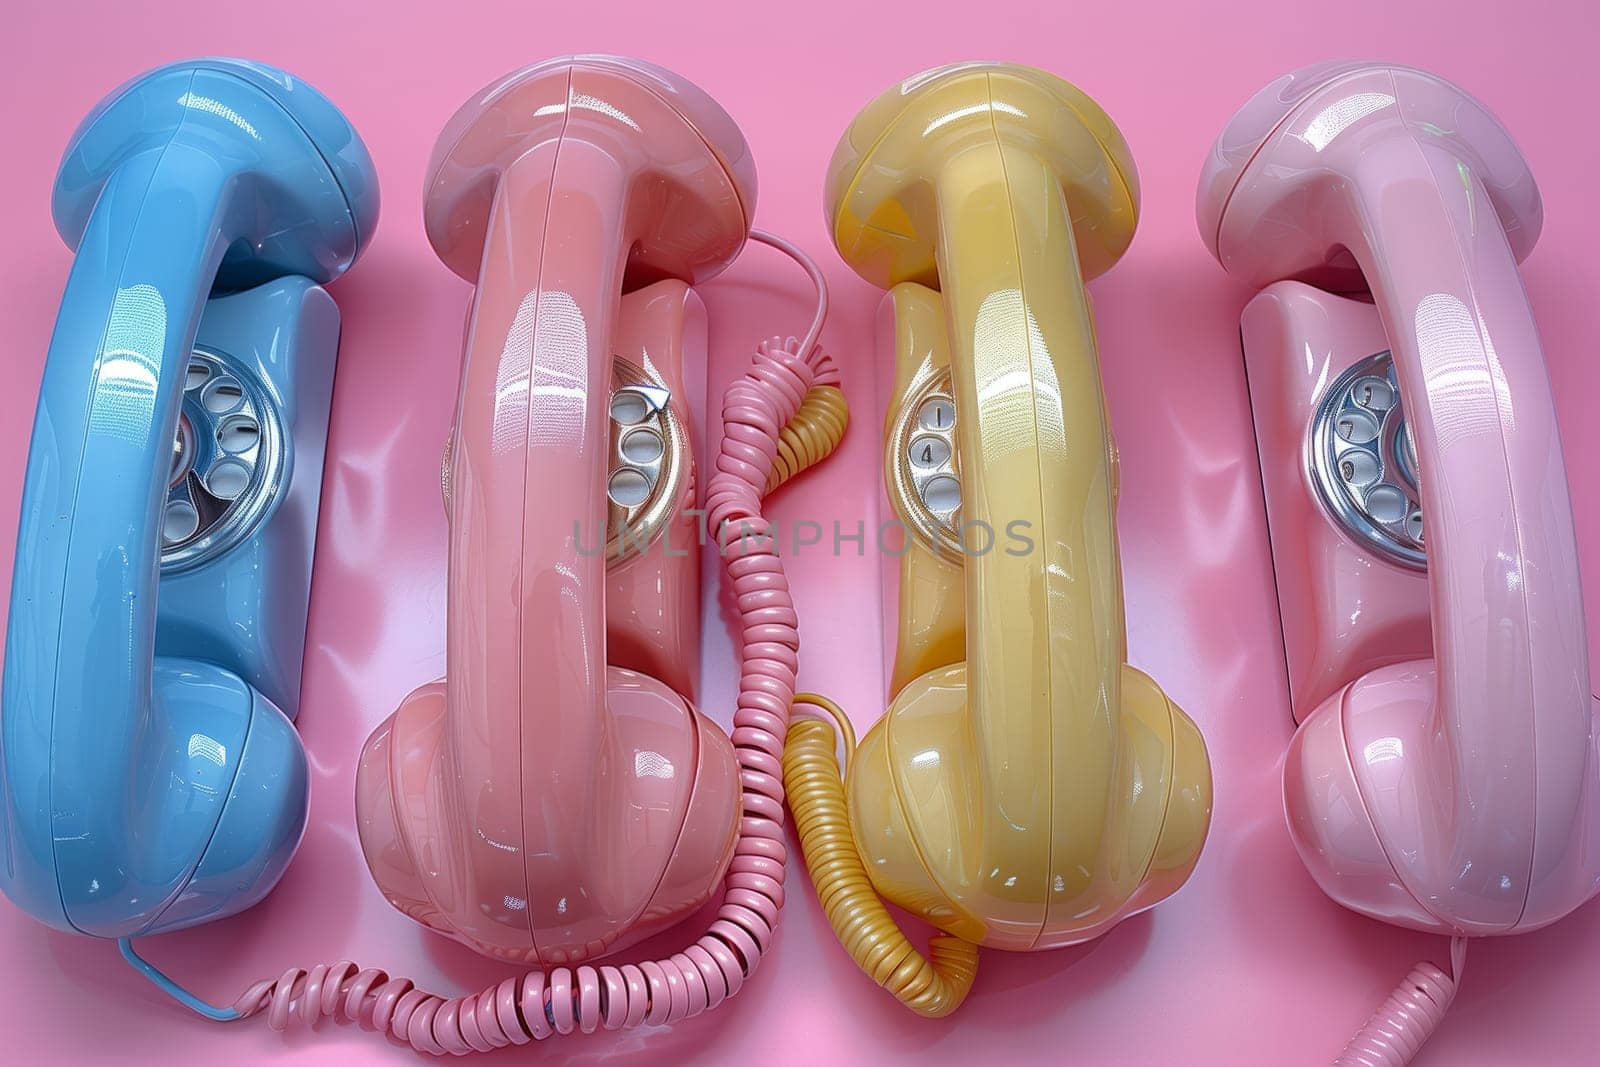 A row of magenta and pink telephones displayed on a vibrant pink background. The color palette evokes feelings of joy and playfulness, making the product visually appealing